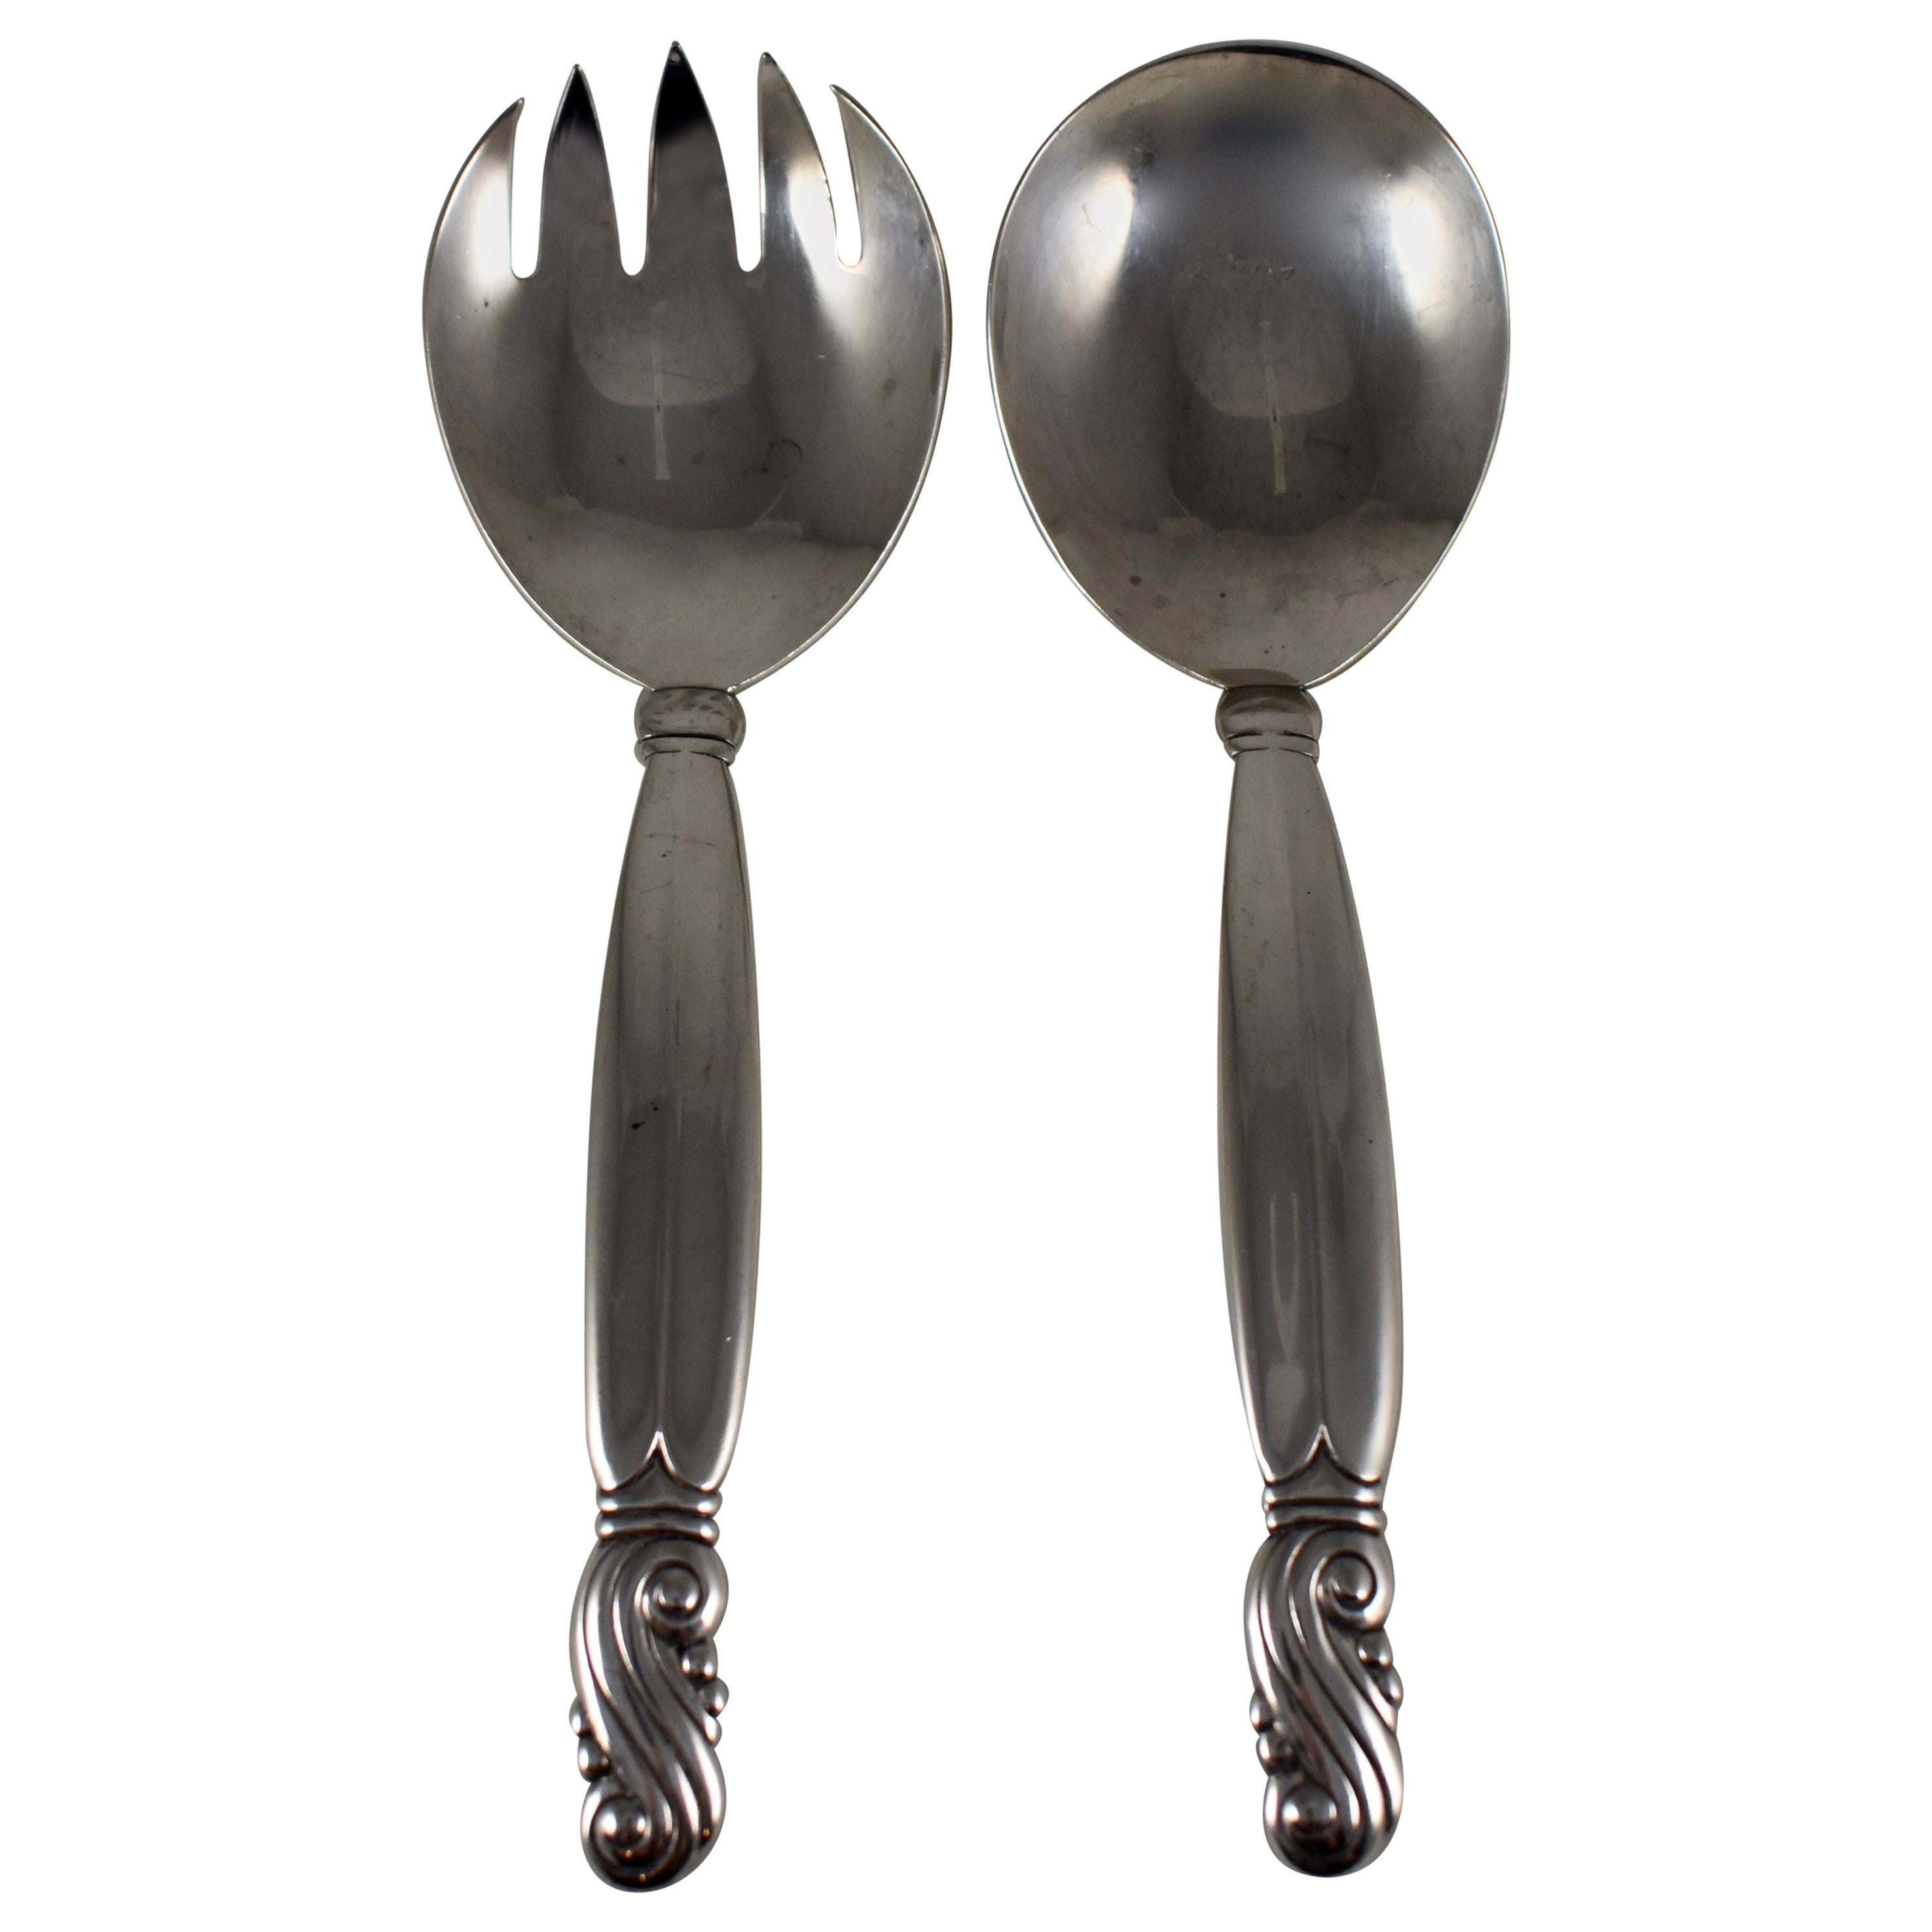 Frank M. Whiting Art Nouveau Sterling Silver Salad Servers, a Handmade Pair For Sale